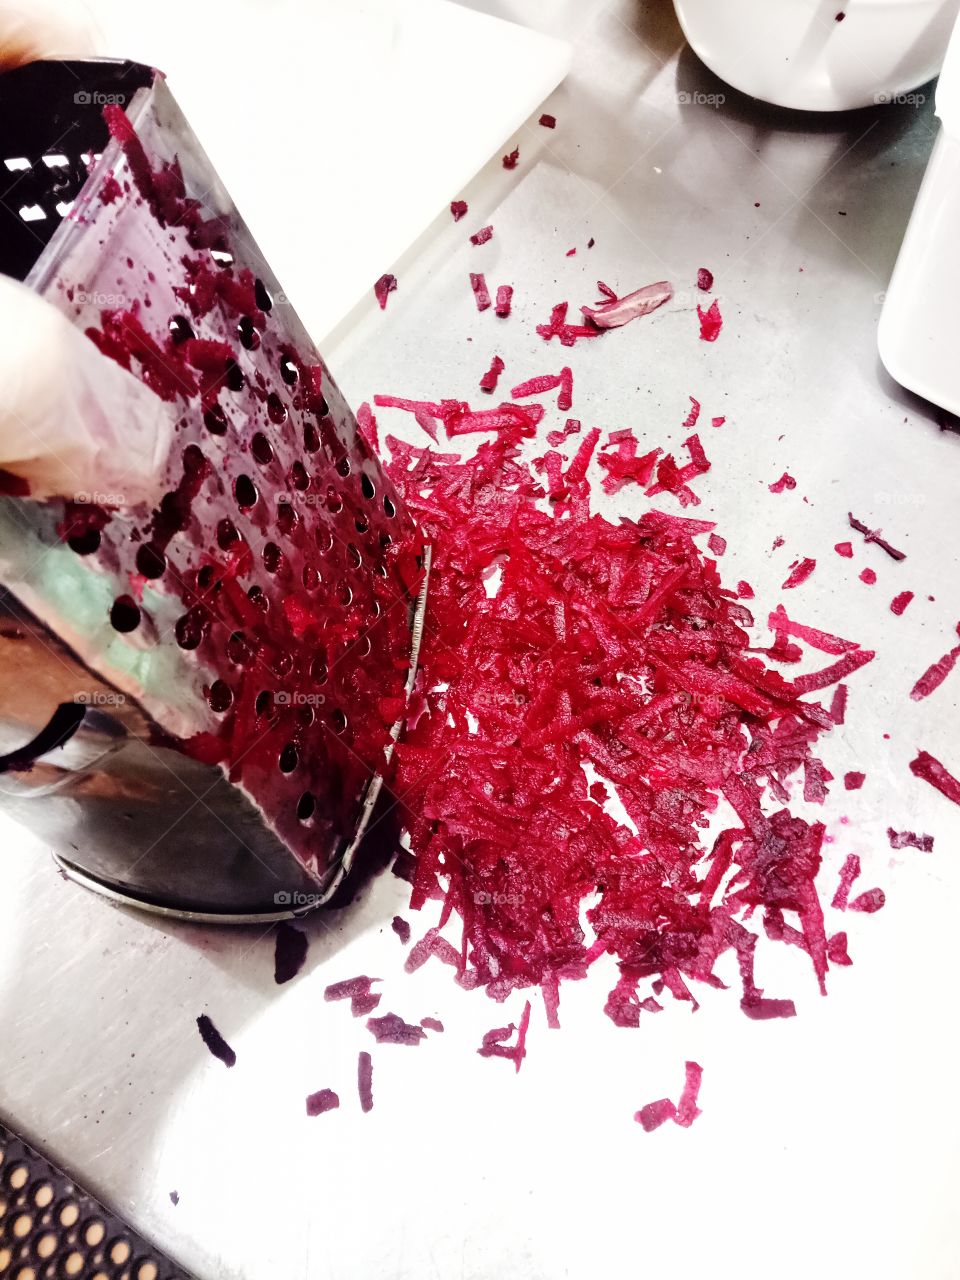 Grating fresh Beetroot for morning preparation in a commercial kitchen